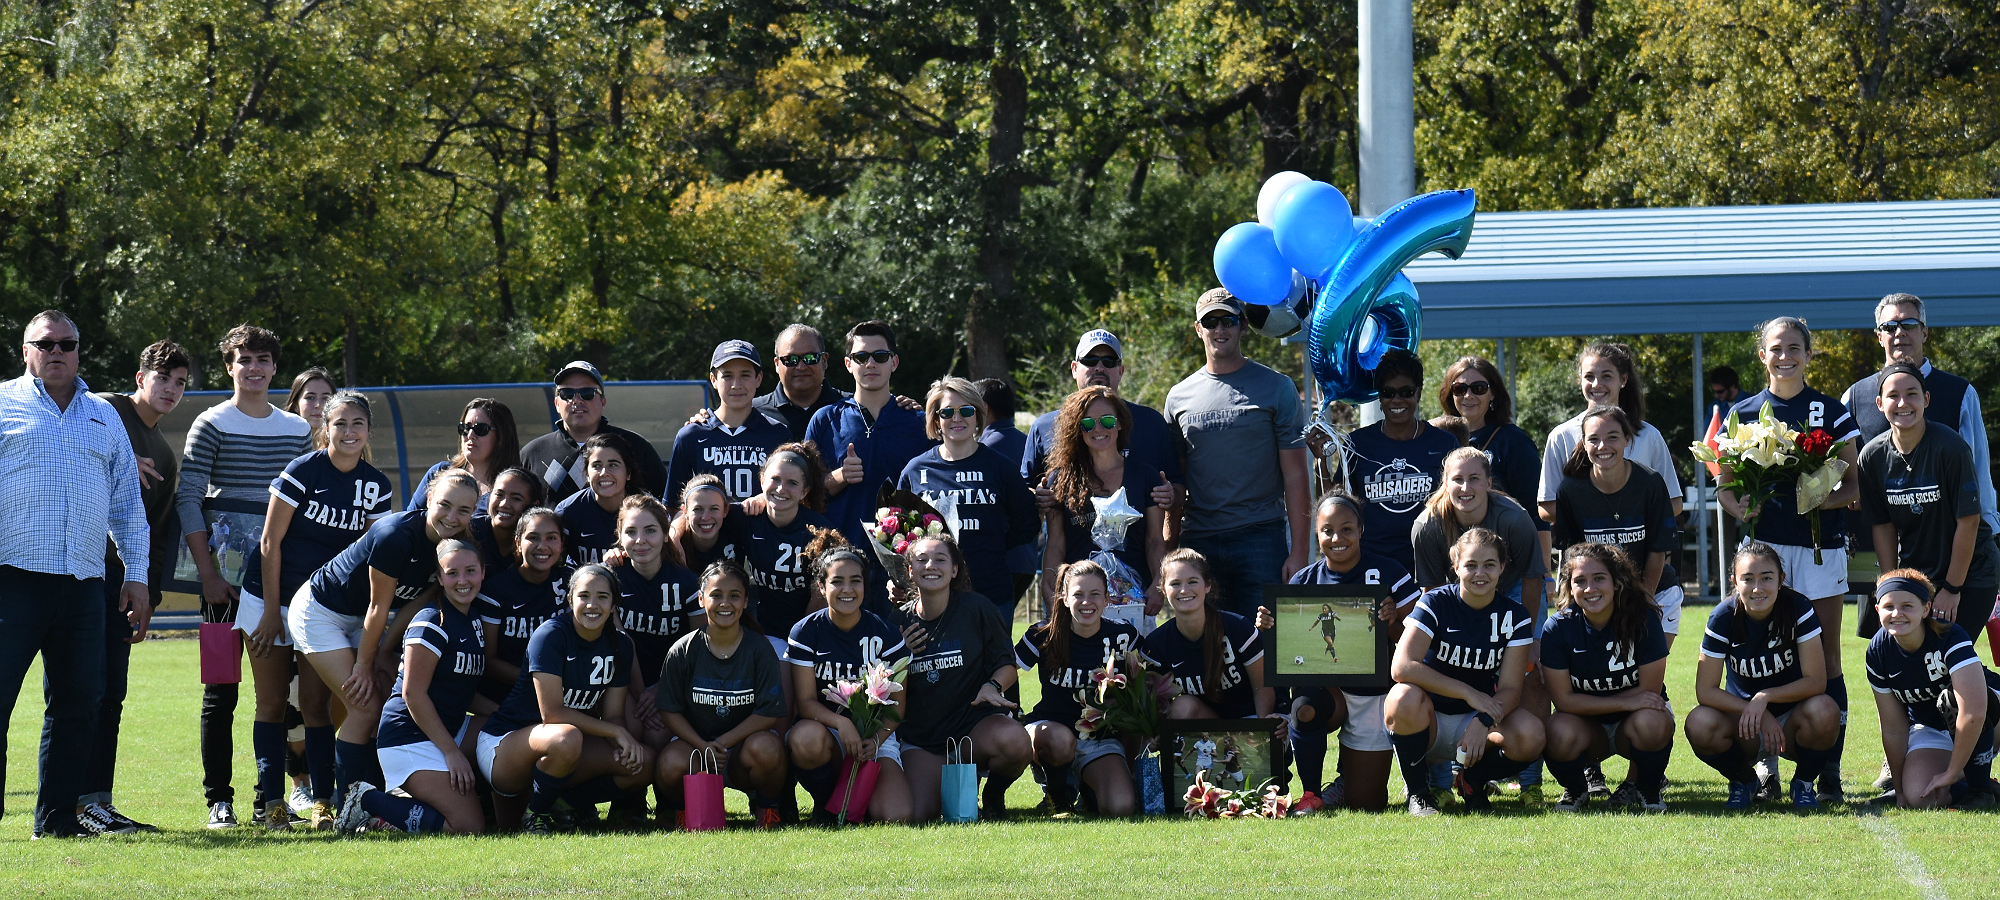 Crusaders celebrated its seniors before taking the field on Sunday.